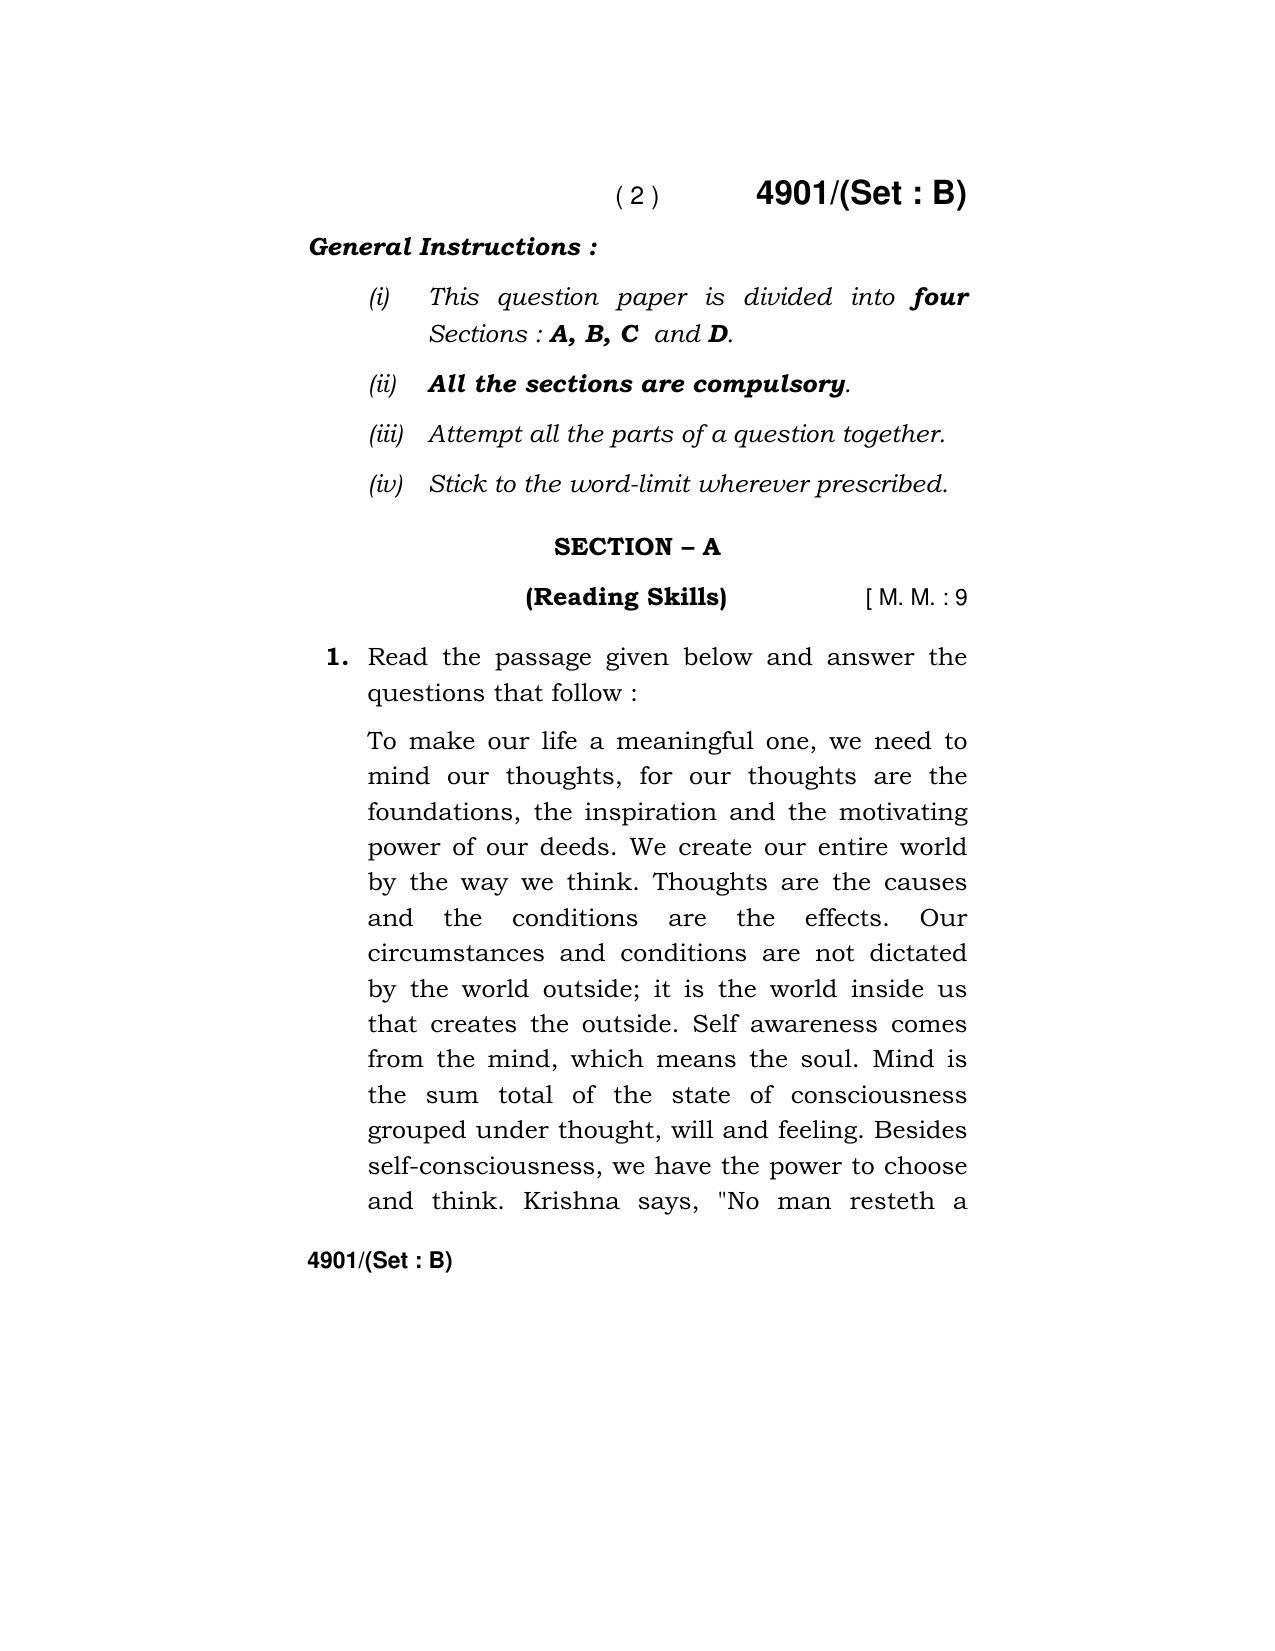 Haryana Board HBSE Class 12 English Core 2020 Question Paper - Page 18